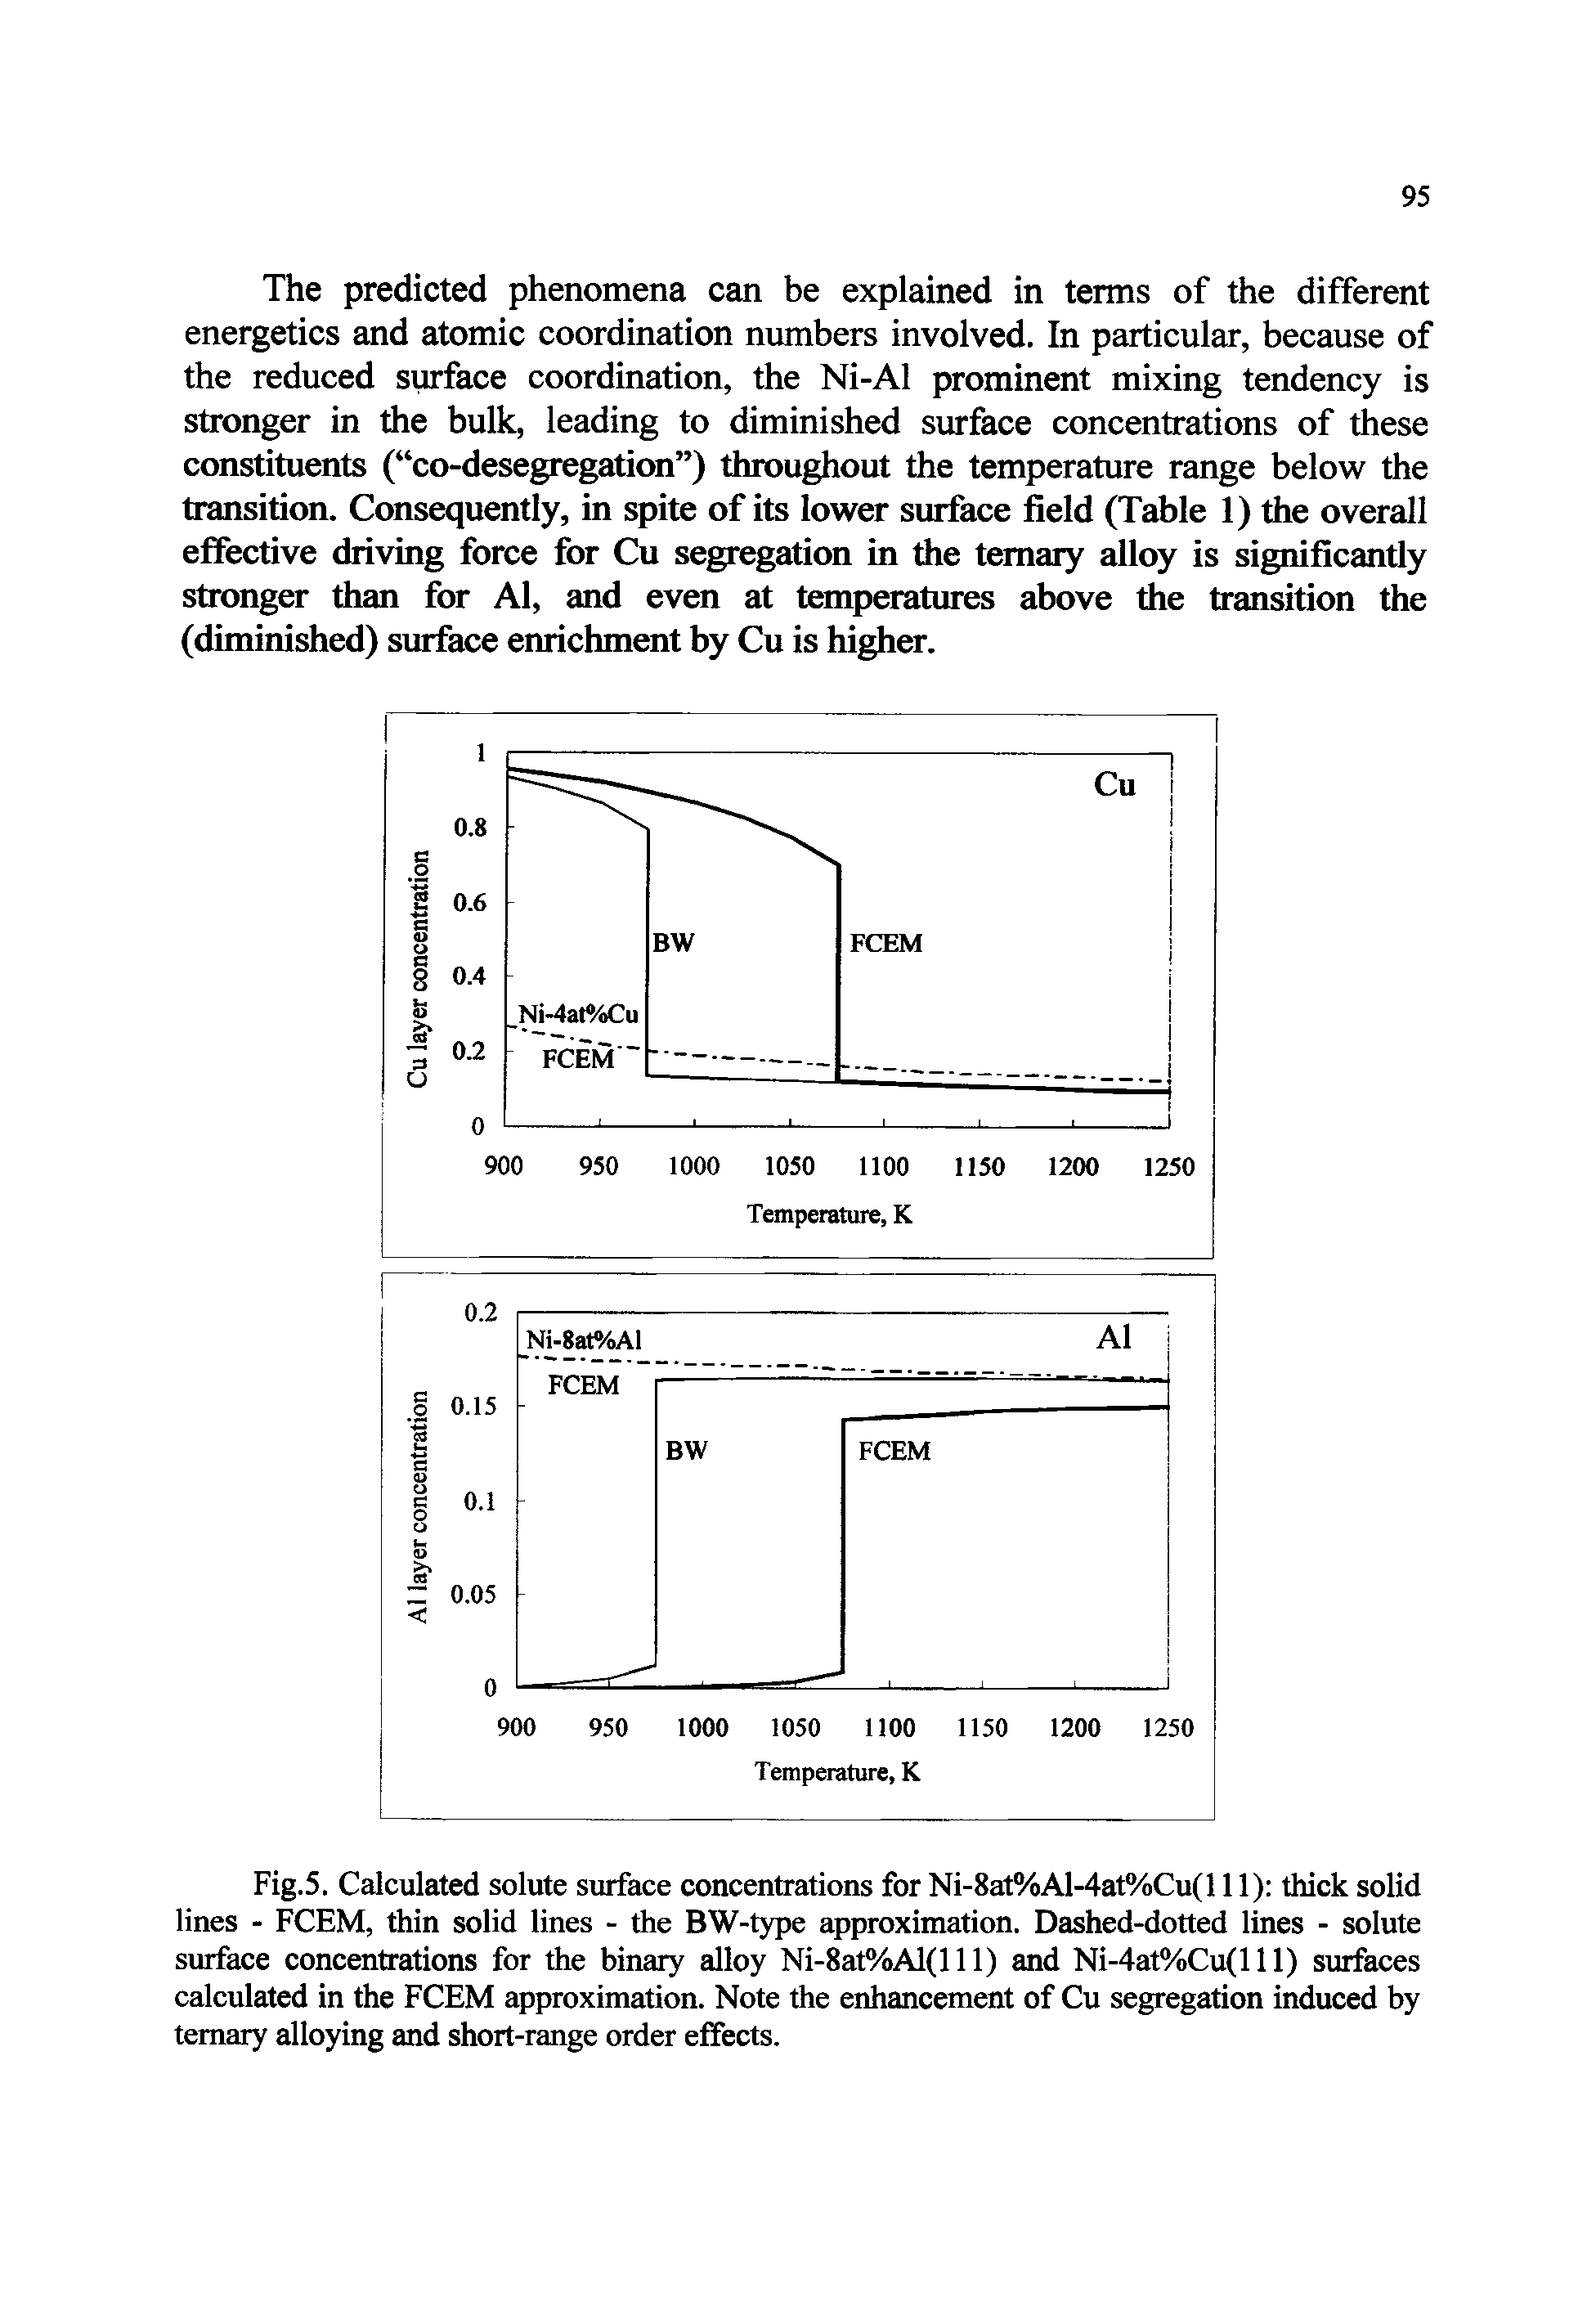 Fig.5. Calculated solute surface concentrations for Ni-8at%Al-4at%Cu(l 11) thick solid lines - FCEM, thin solid lines - the BW-type approximation. Dashed-dotted lines - solute surface concentrations for the binary alloy Ni-8at%Al(lll) and Ni-4at%Cu(l 11) surfaces calculated in the FCEM approximation. Note the enhancement of Cu segregation induced by ternary alloying and short-range order effects.